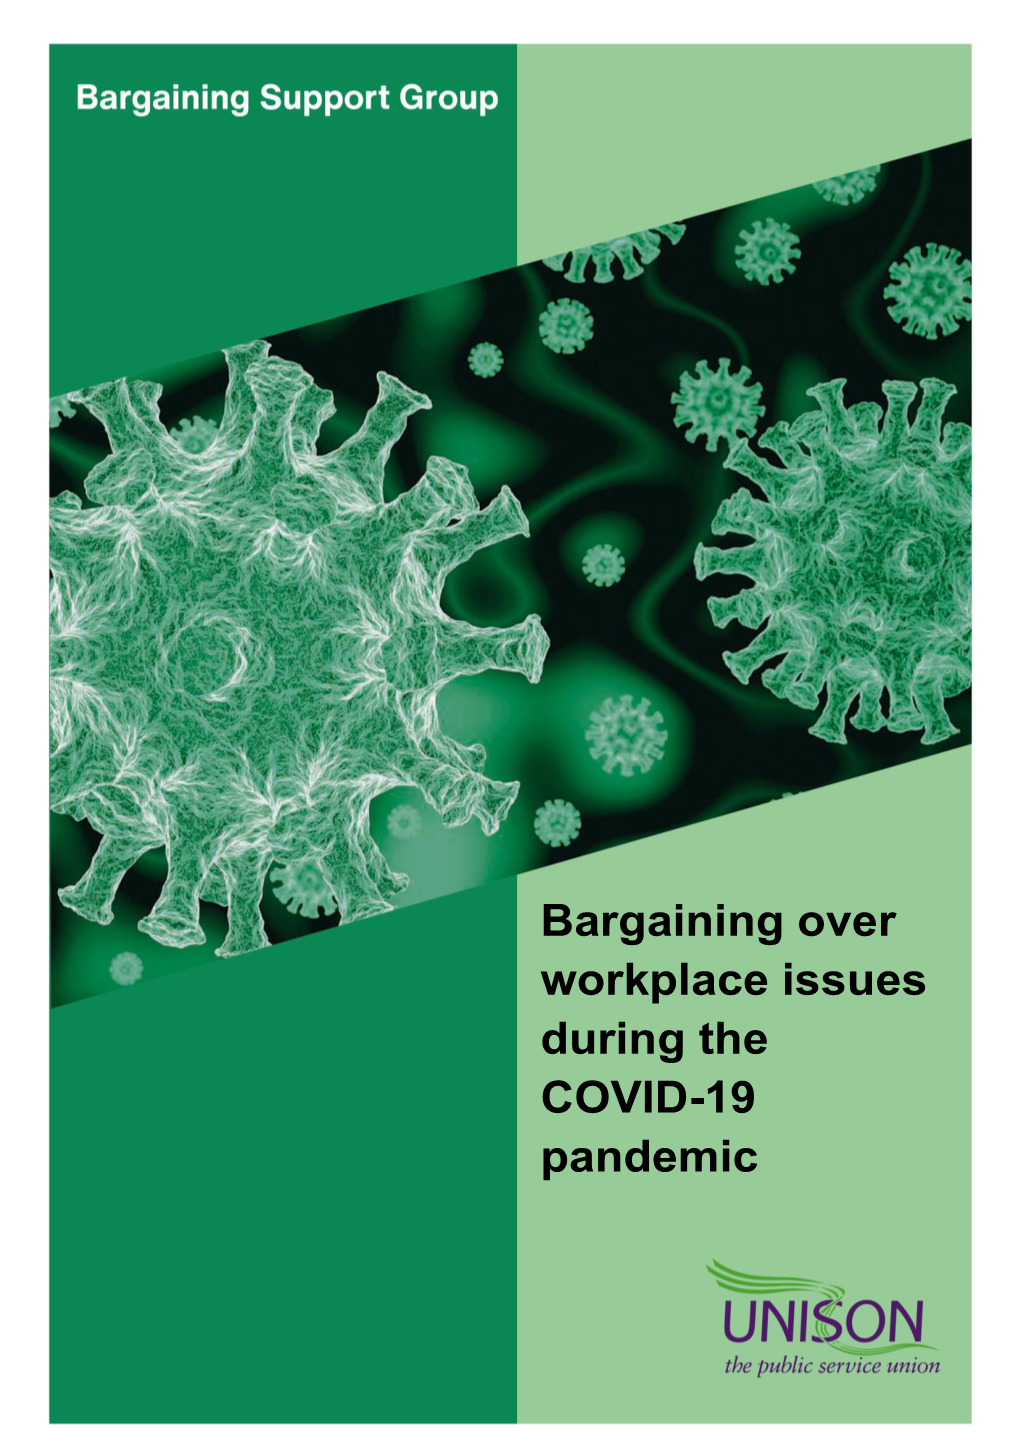 Bargaining Over Workplace Issues During the COVID-19 Pandemic